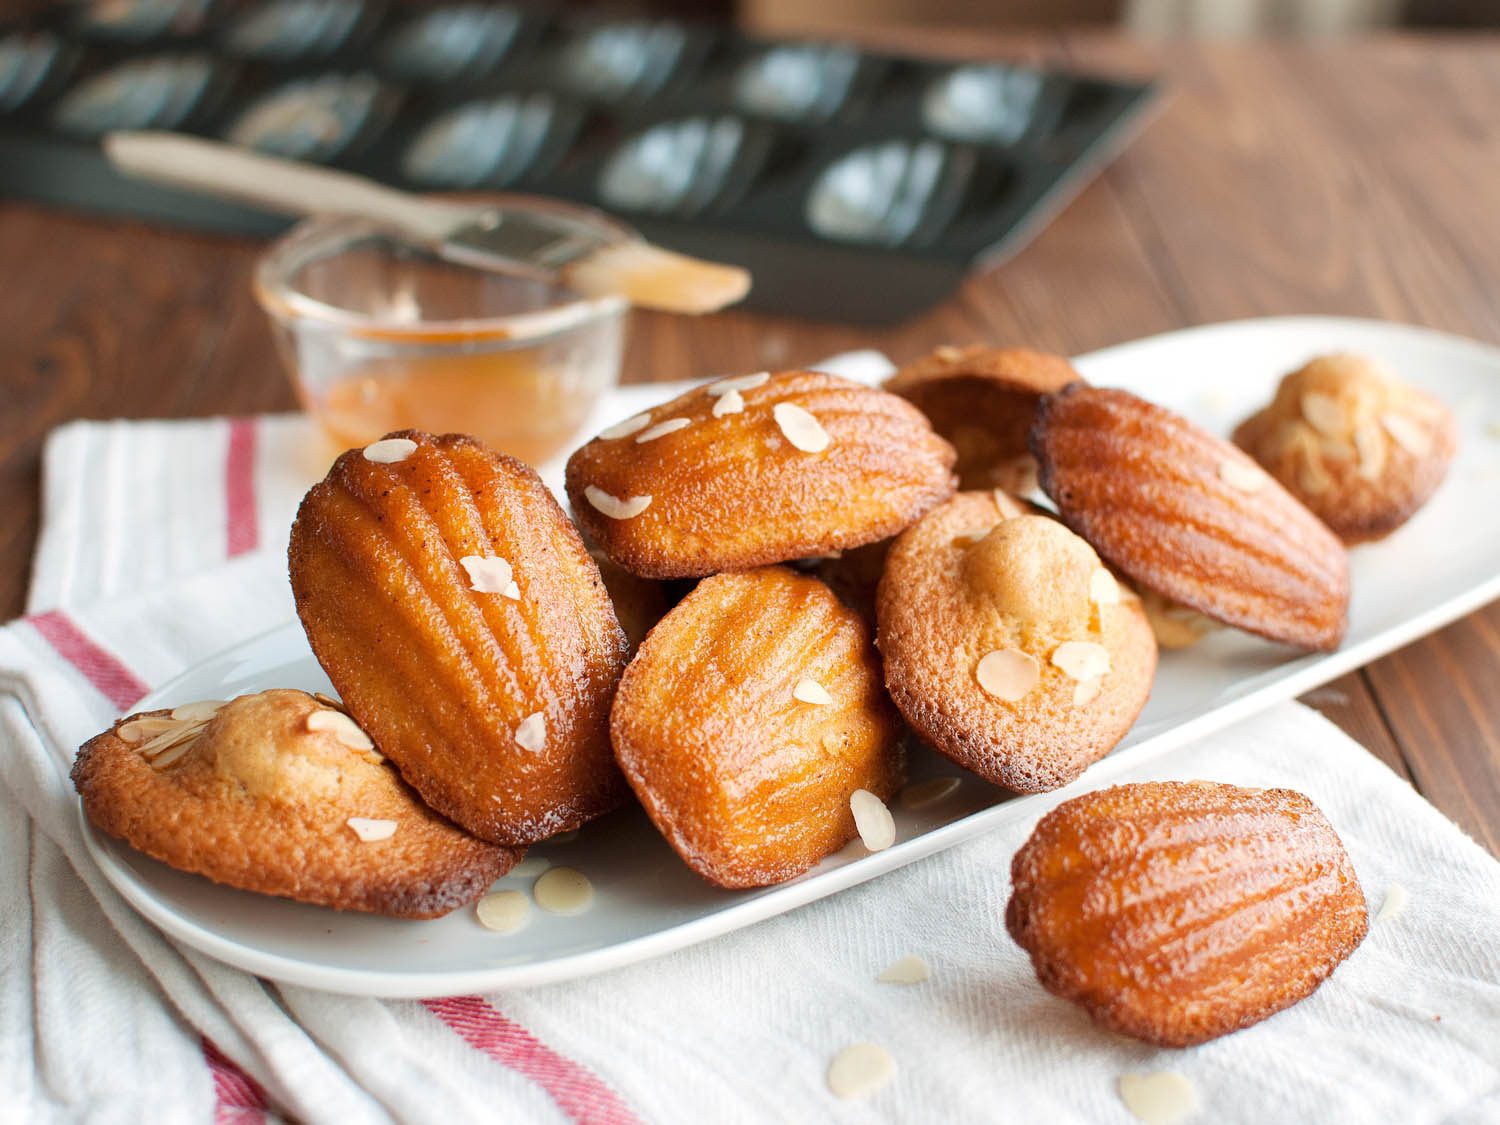 This Picture Quiz Will Challenge Your Knowledge of Classic French Desserts 🥐 – Can You Score High? Madeleines